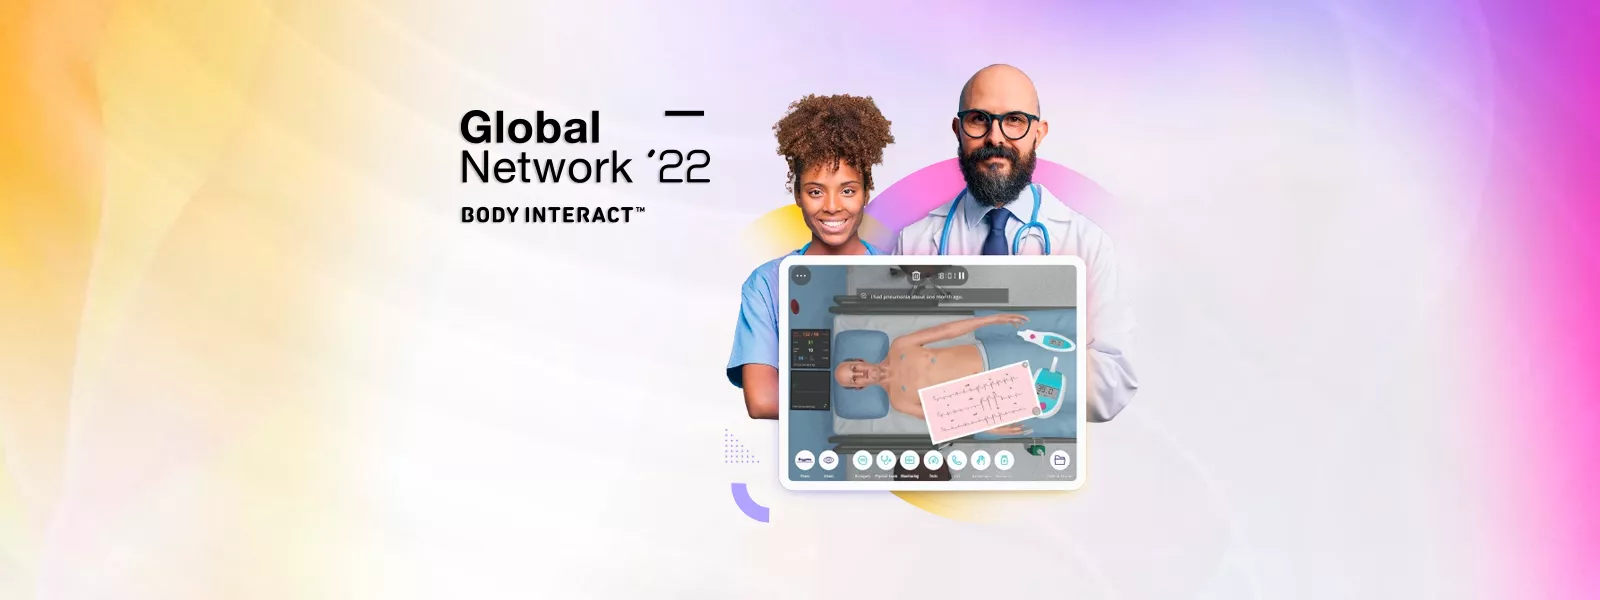 Global Network Event 2022 by Body Interact